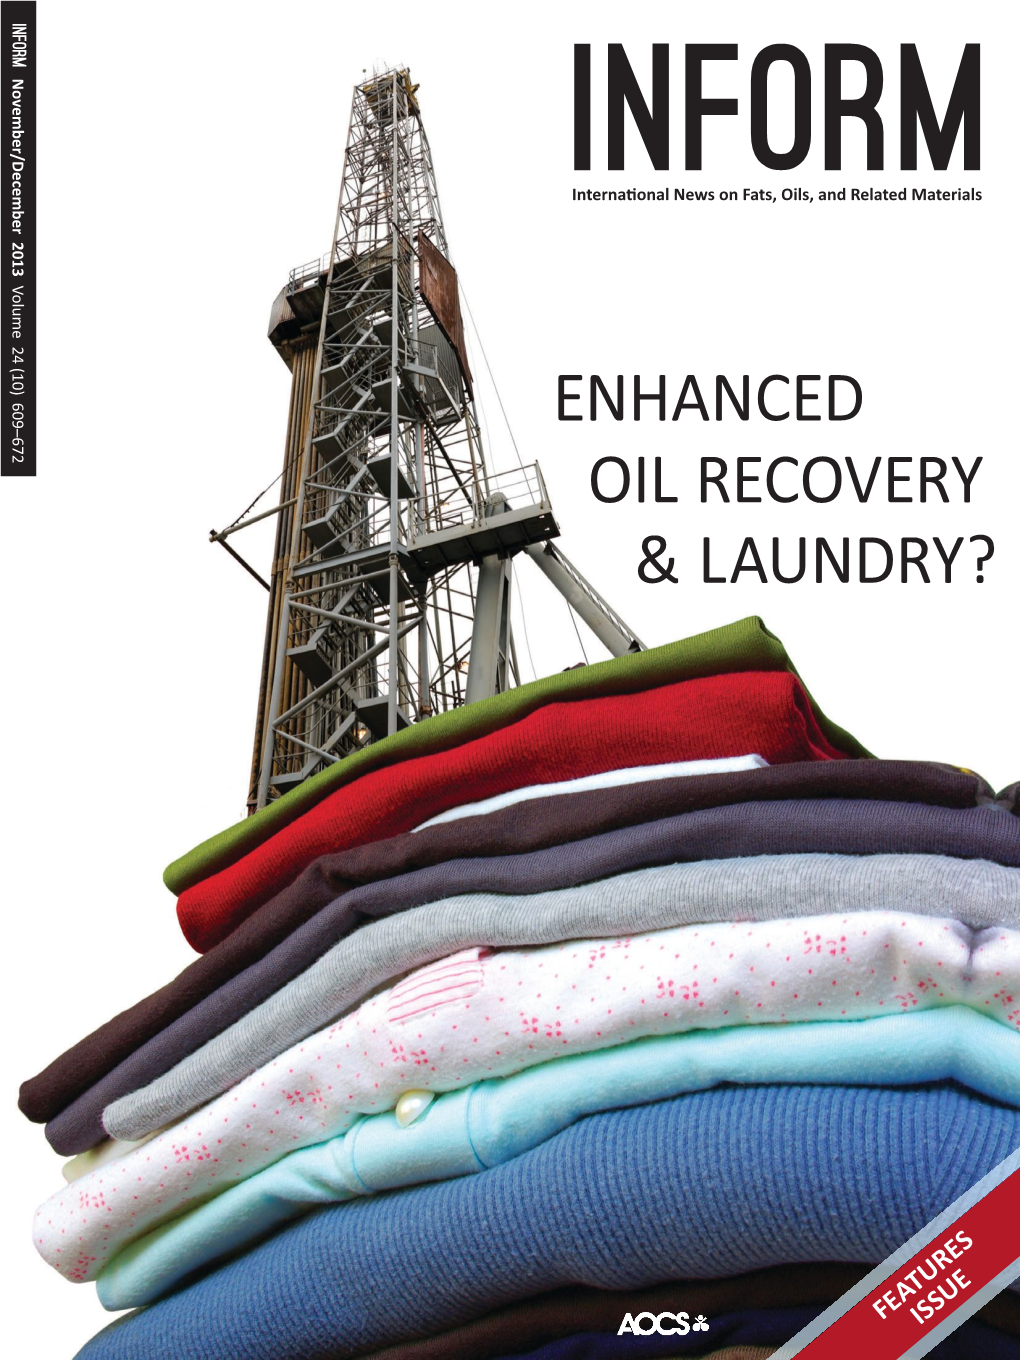 Enhanced Oil Recovery & Laundry?